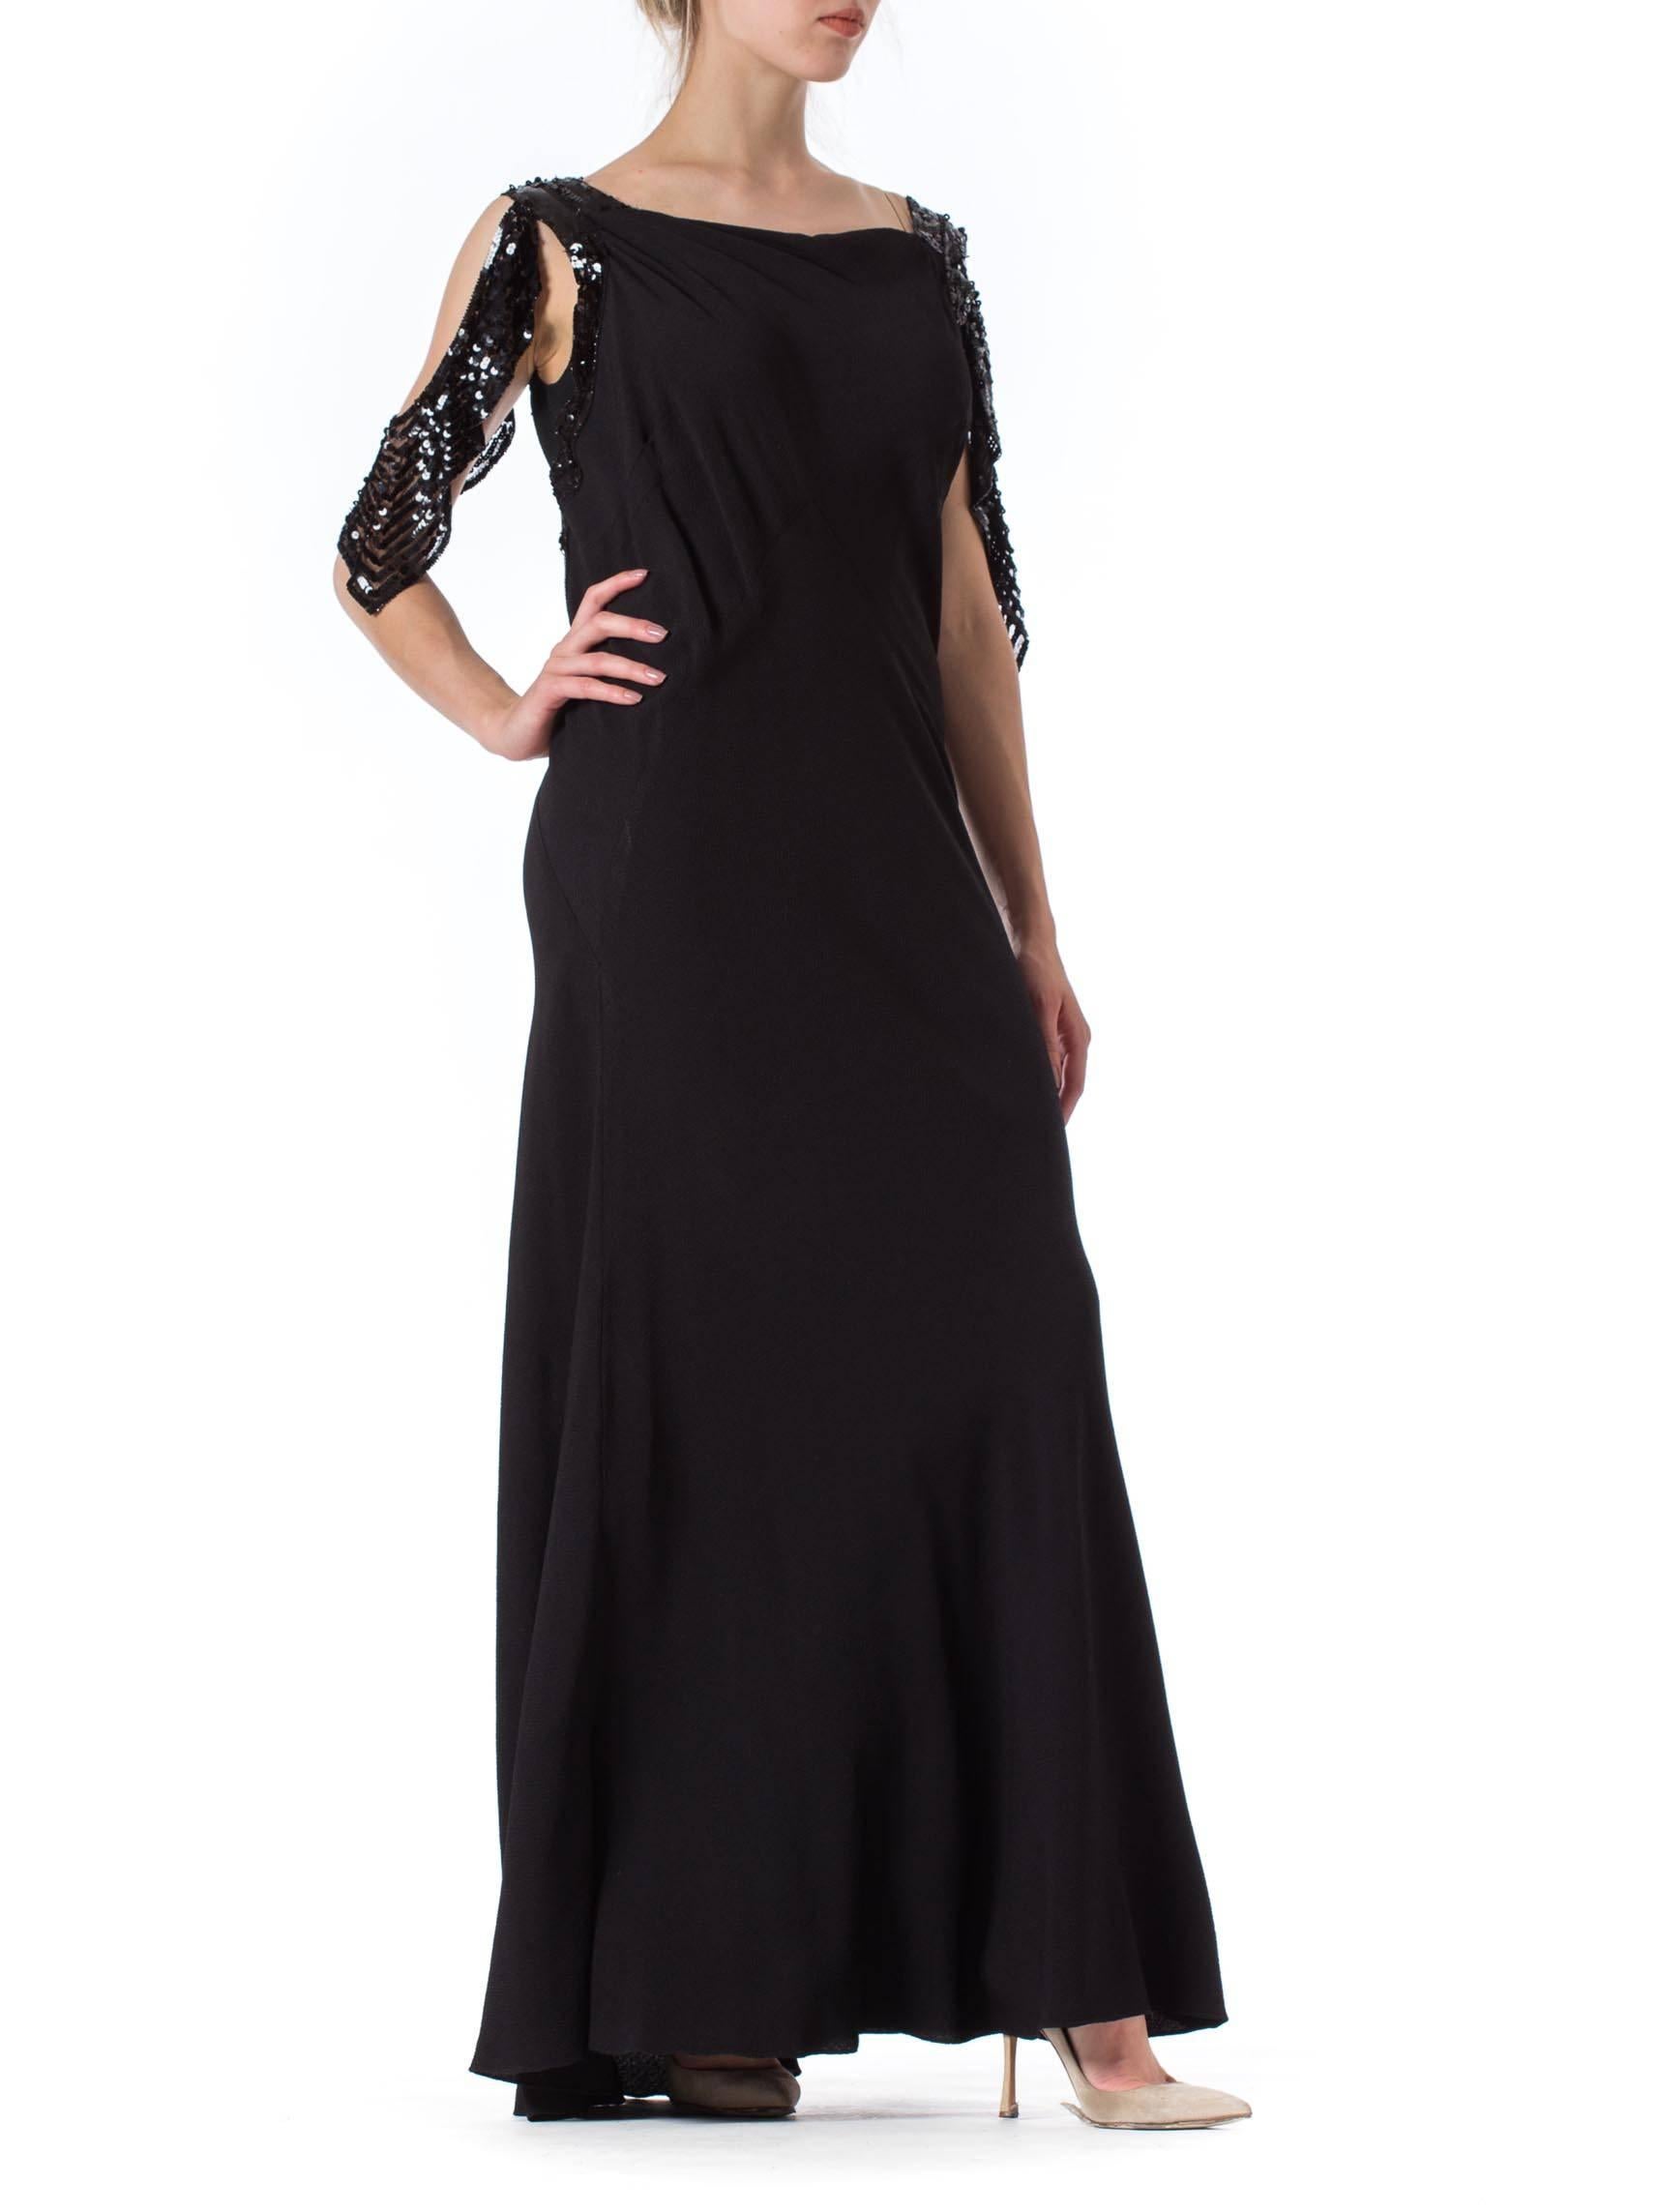 1930S Black Bias Cut Rayon Crepe Gown With Celluloid Sequin Peek-A-Boo ...